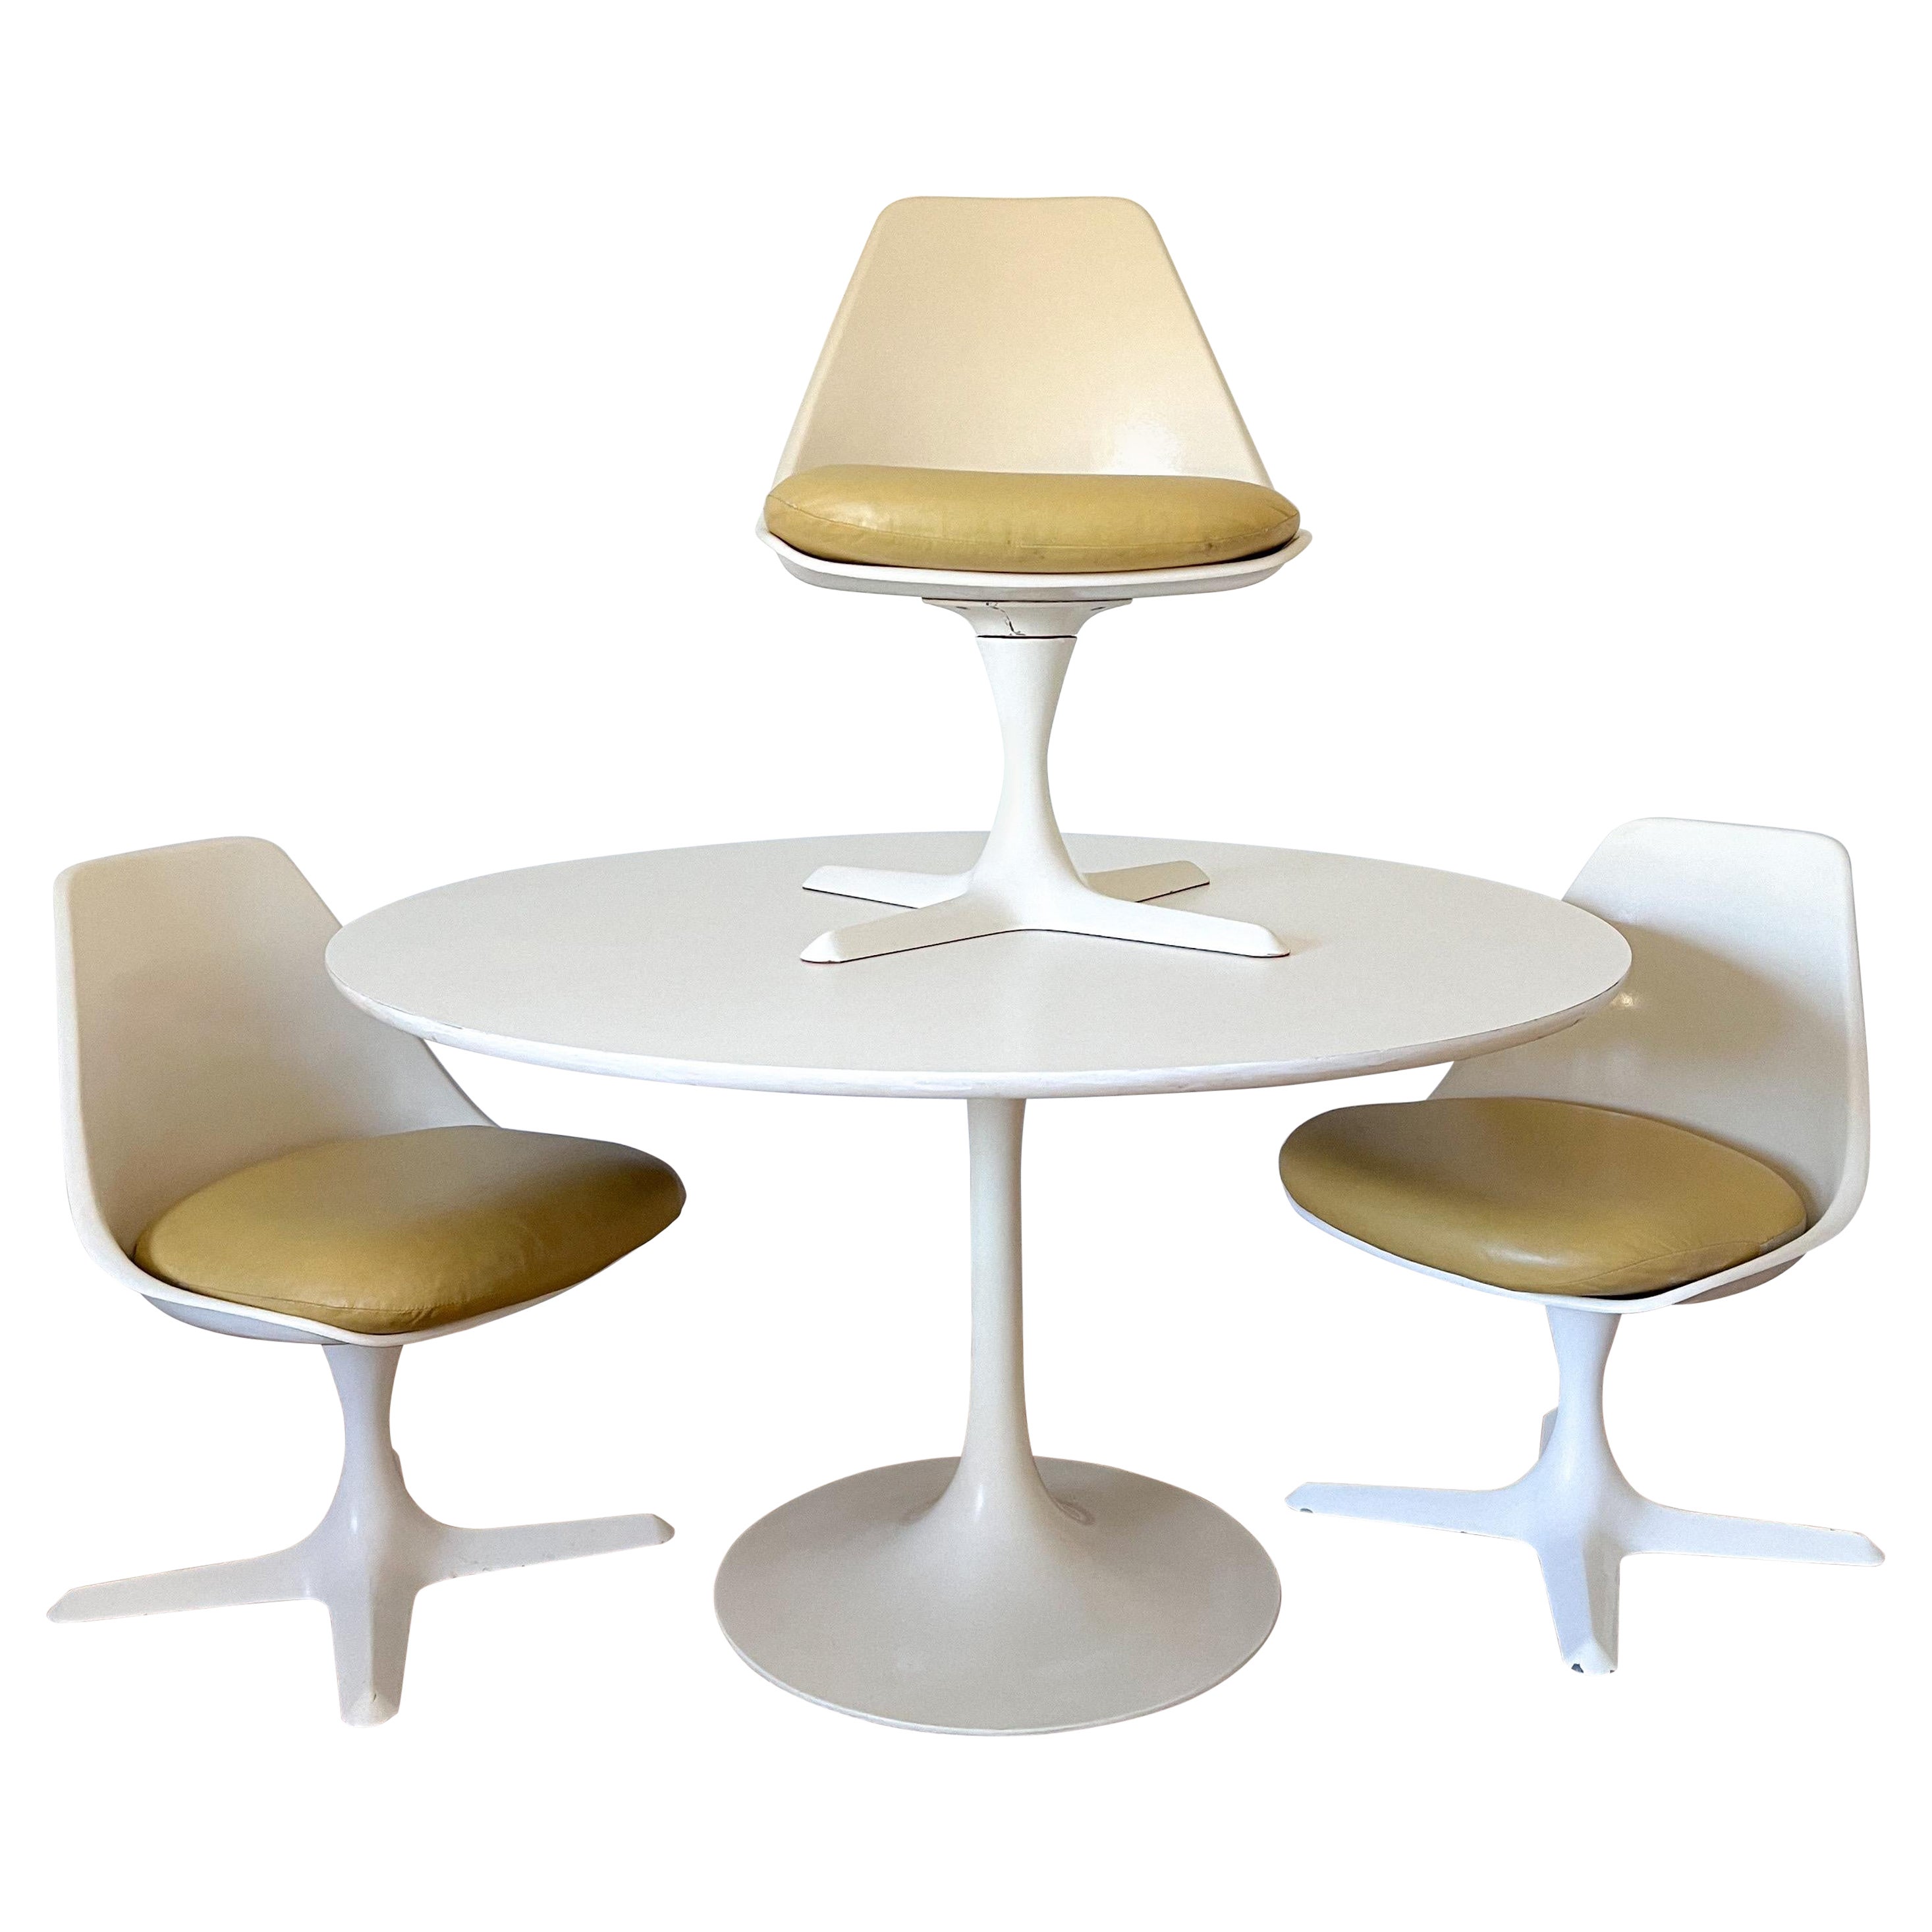 Space Age 4-Piece Dining Set by Maurice Burke for Arkana, 1960s